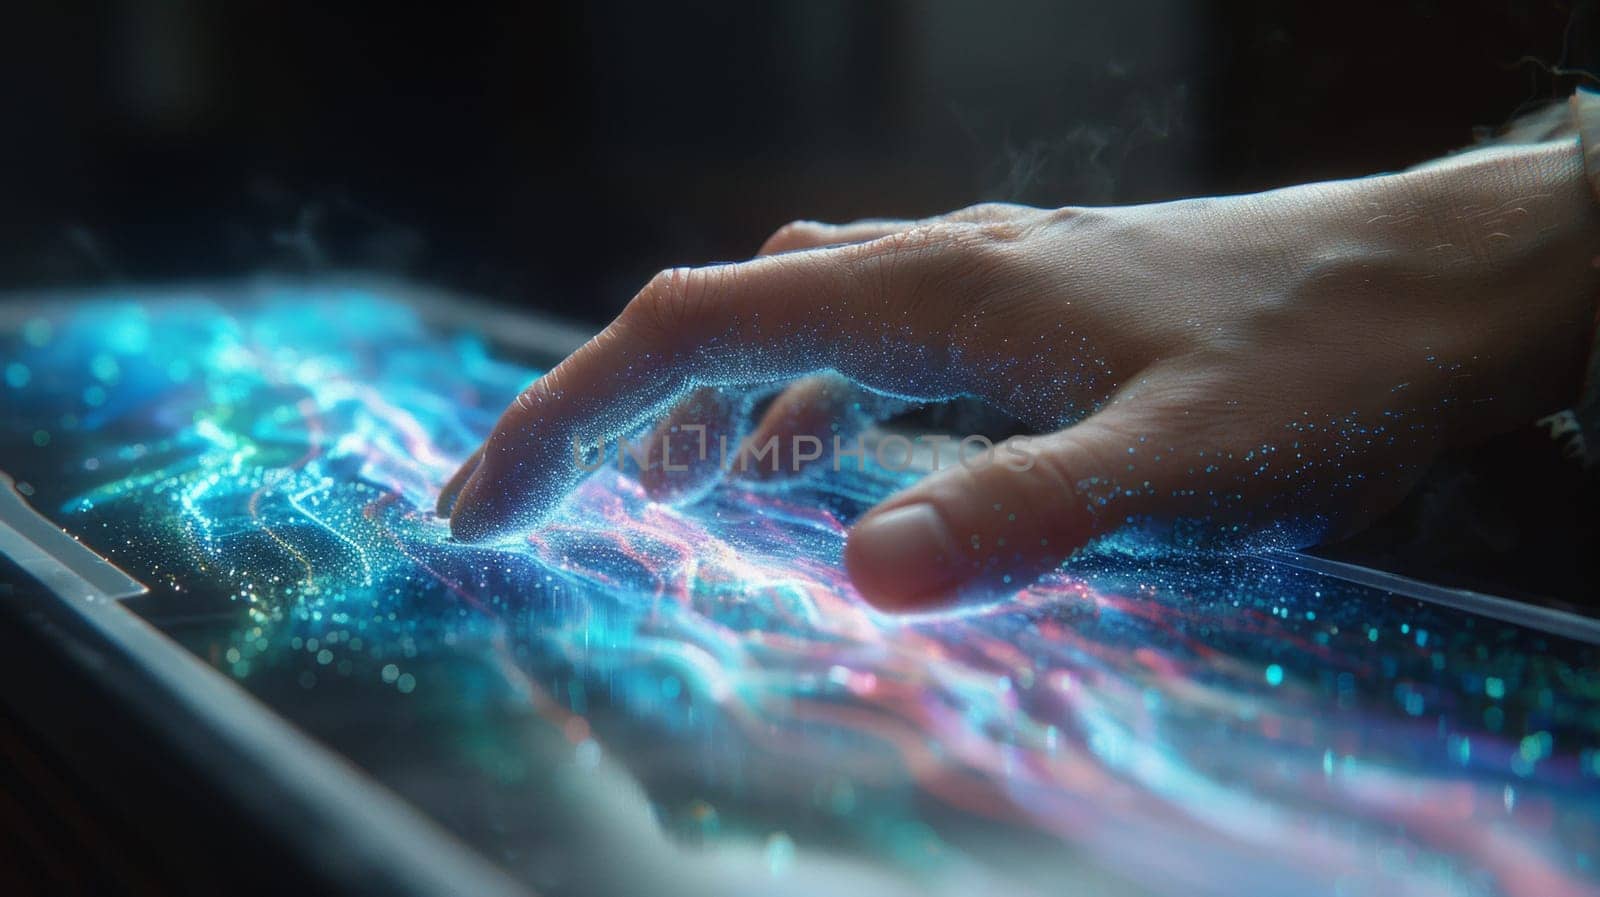 A person's hand is touching a glowing screen on top of the table